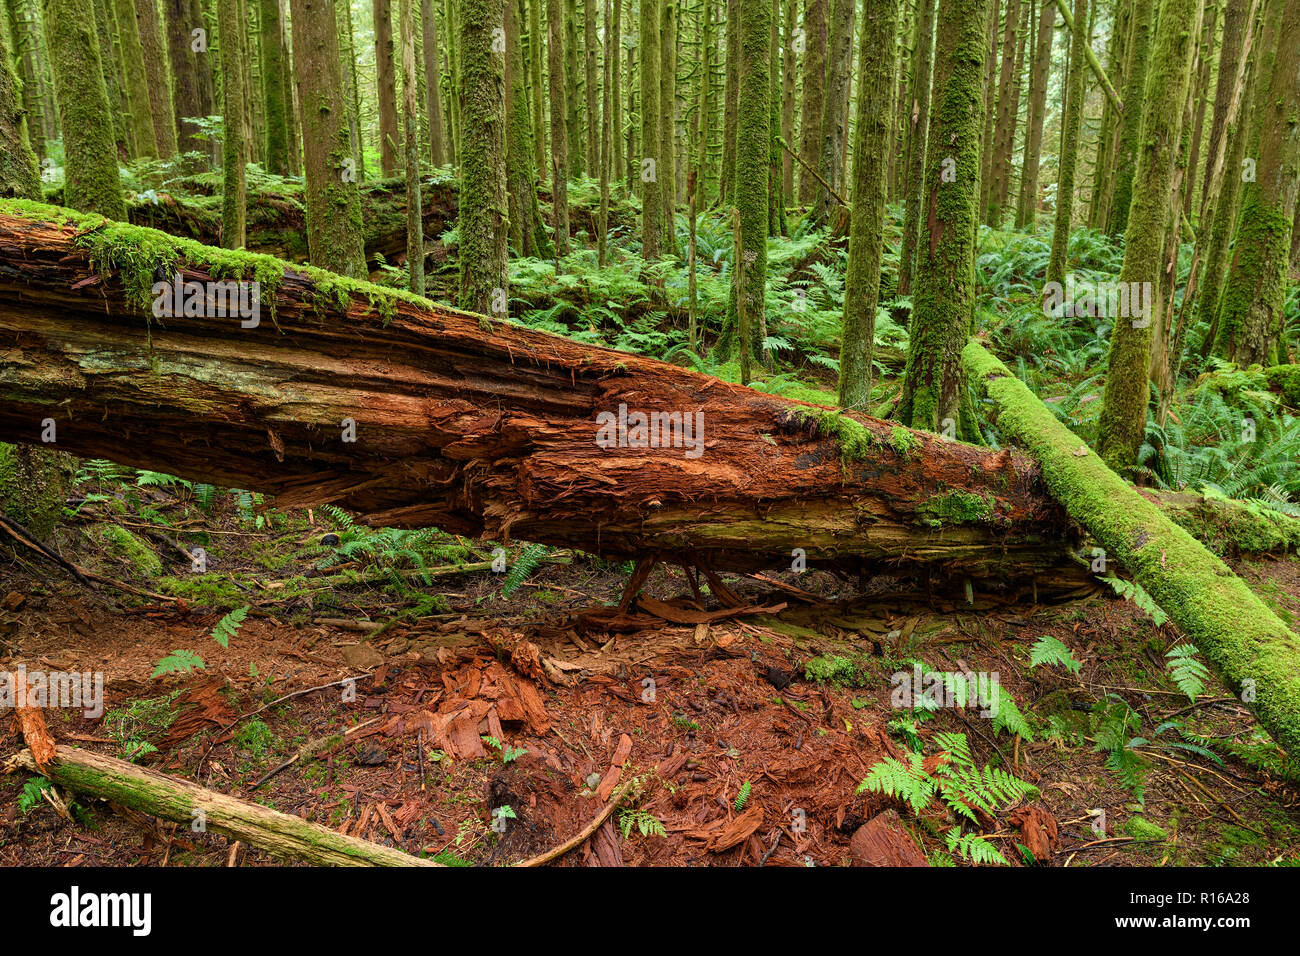 Lush vegetation and giant tree trunk in the Golden Ears Provincial Park, British Columbia, Canada Stock Photo